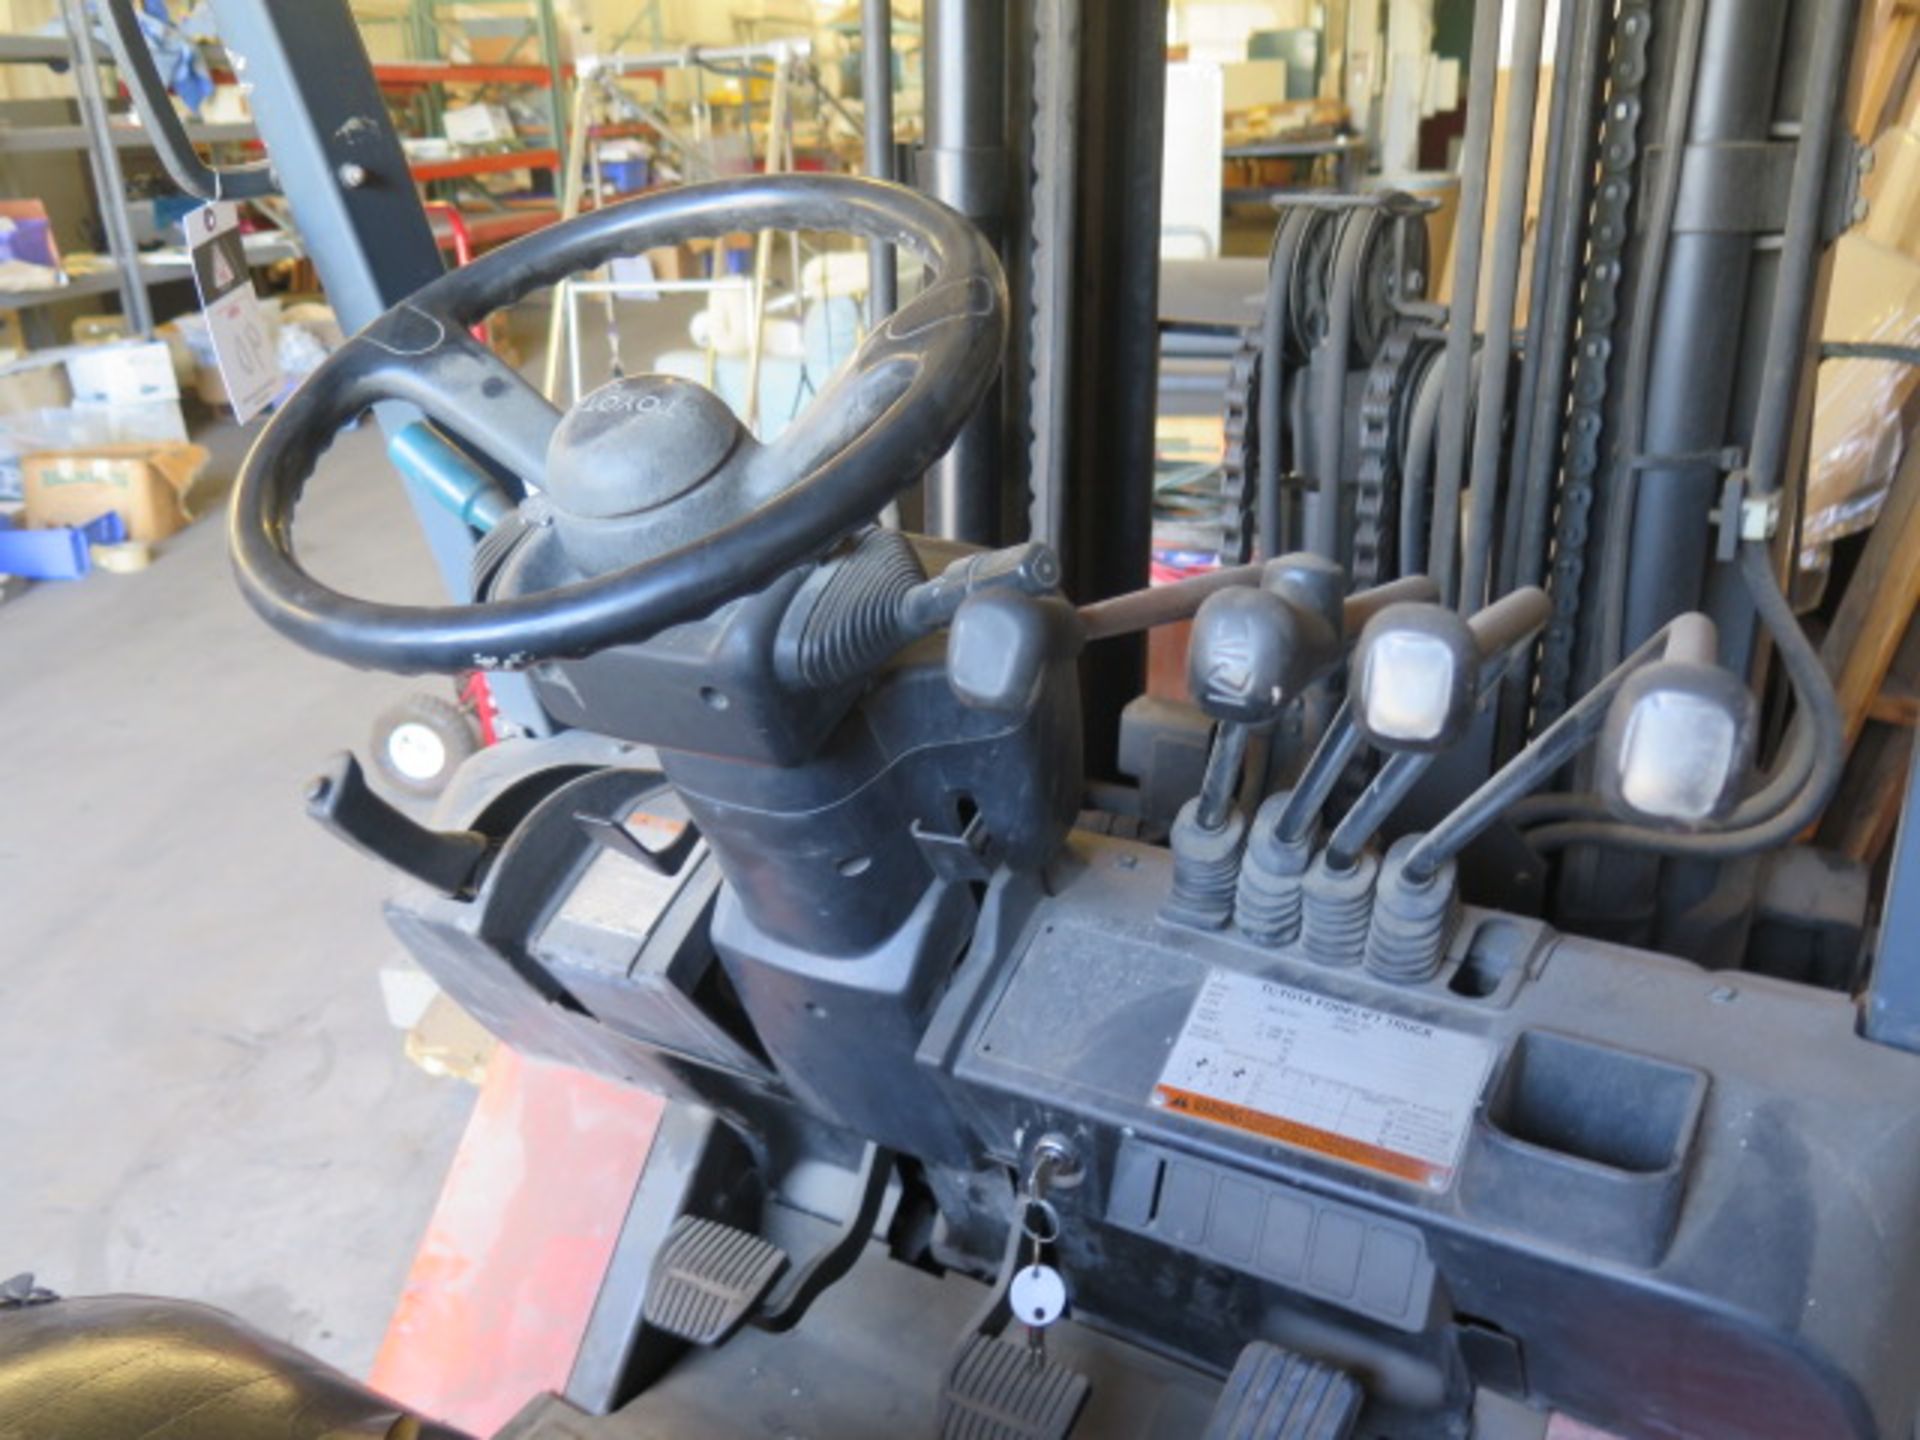 Toyota 7FGCU30 4750 Lb Cap LPG Forklift s/n 60080 w/ 3-Stage Mast, 188” Lift, Side Shift, SOLD AS IS - Image 9 of 13